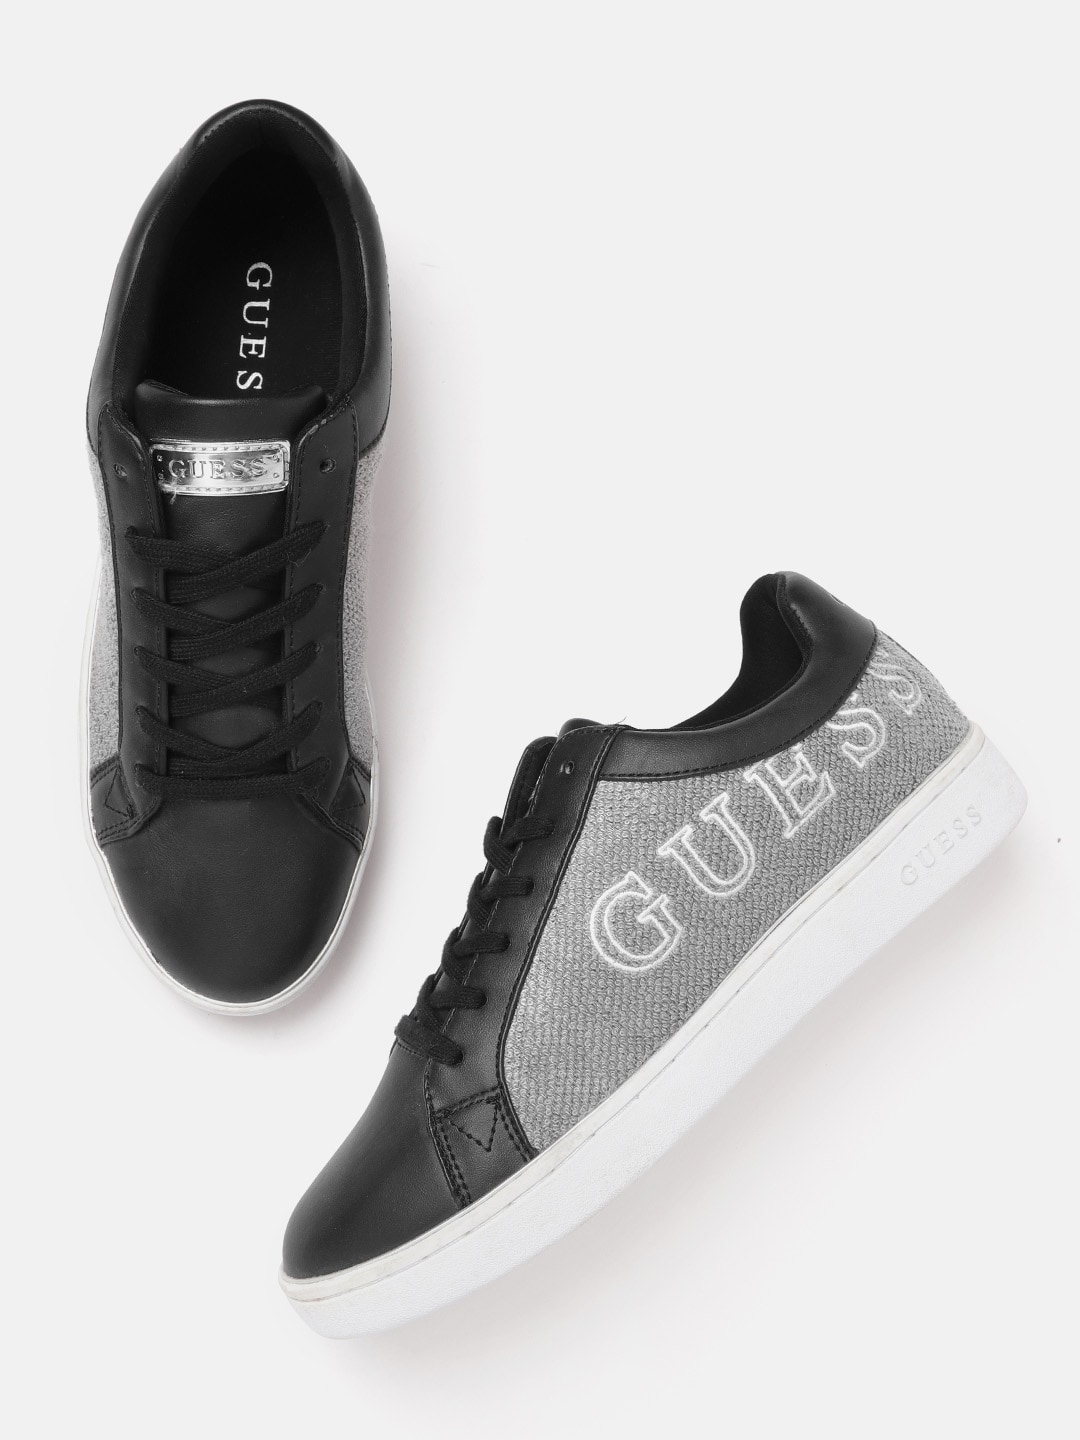 GUESS Women Black & Grey Colourblocked Sneakers Price in India